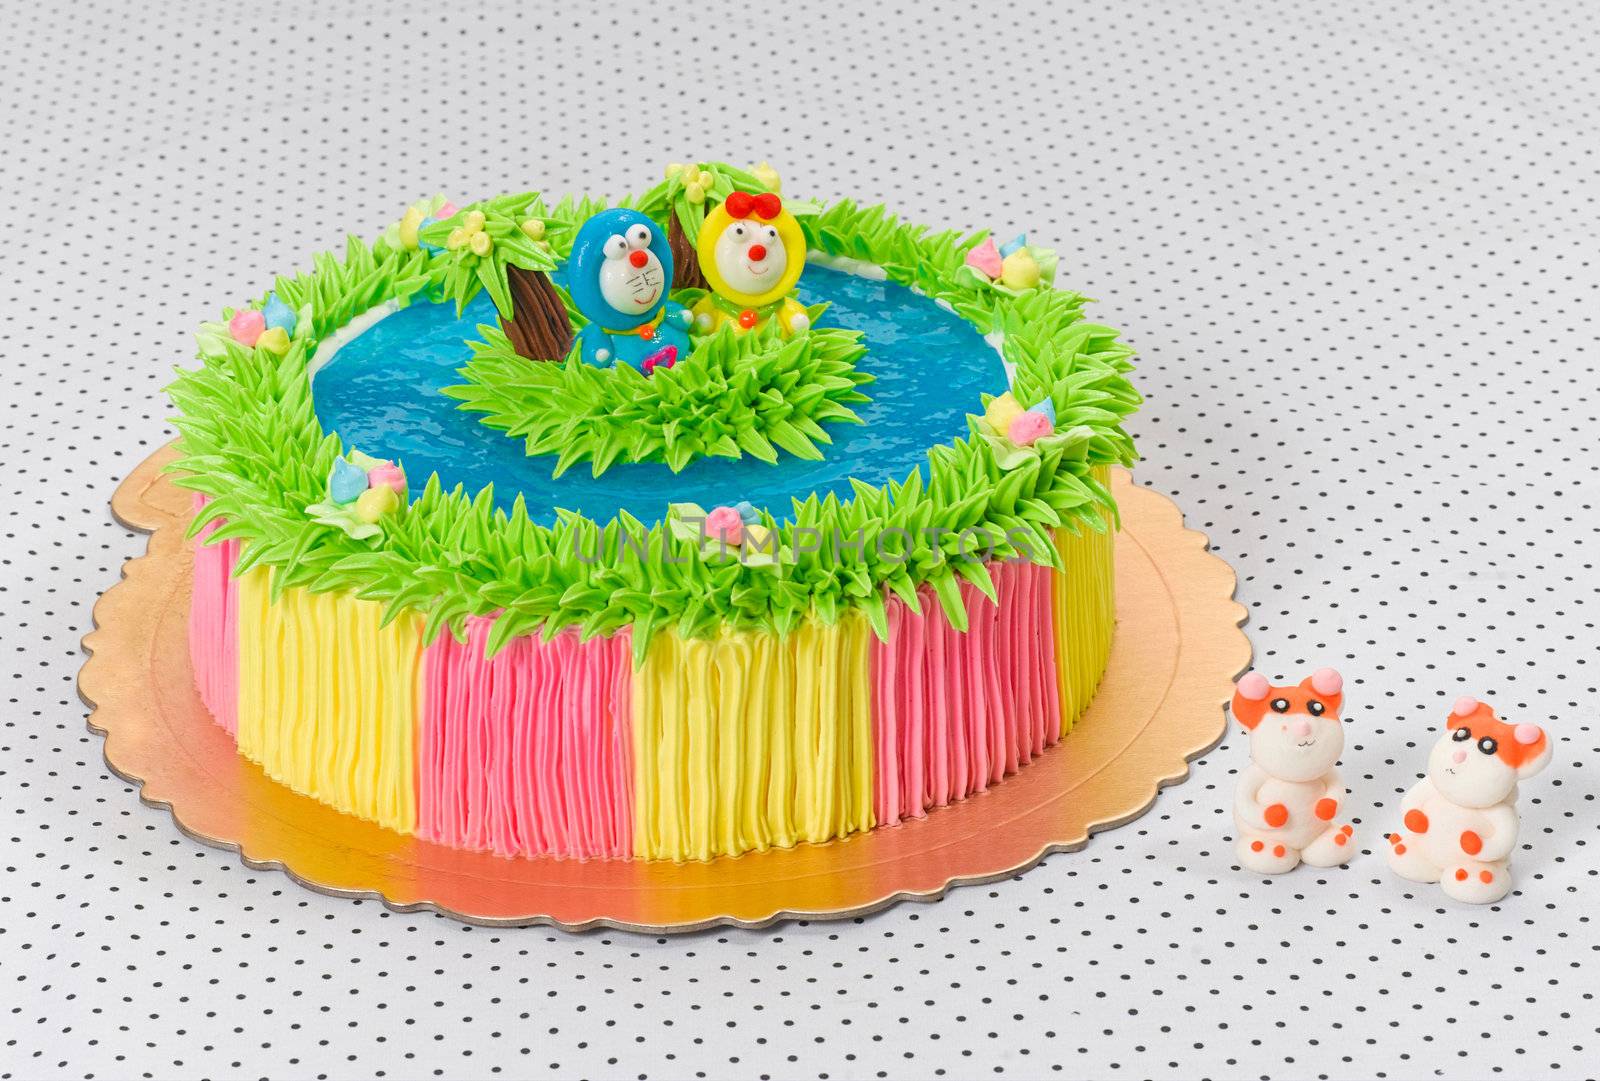 Doraemon on the island beautiful and colorful birthday cake for special day